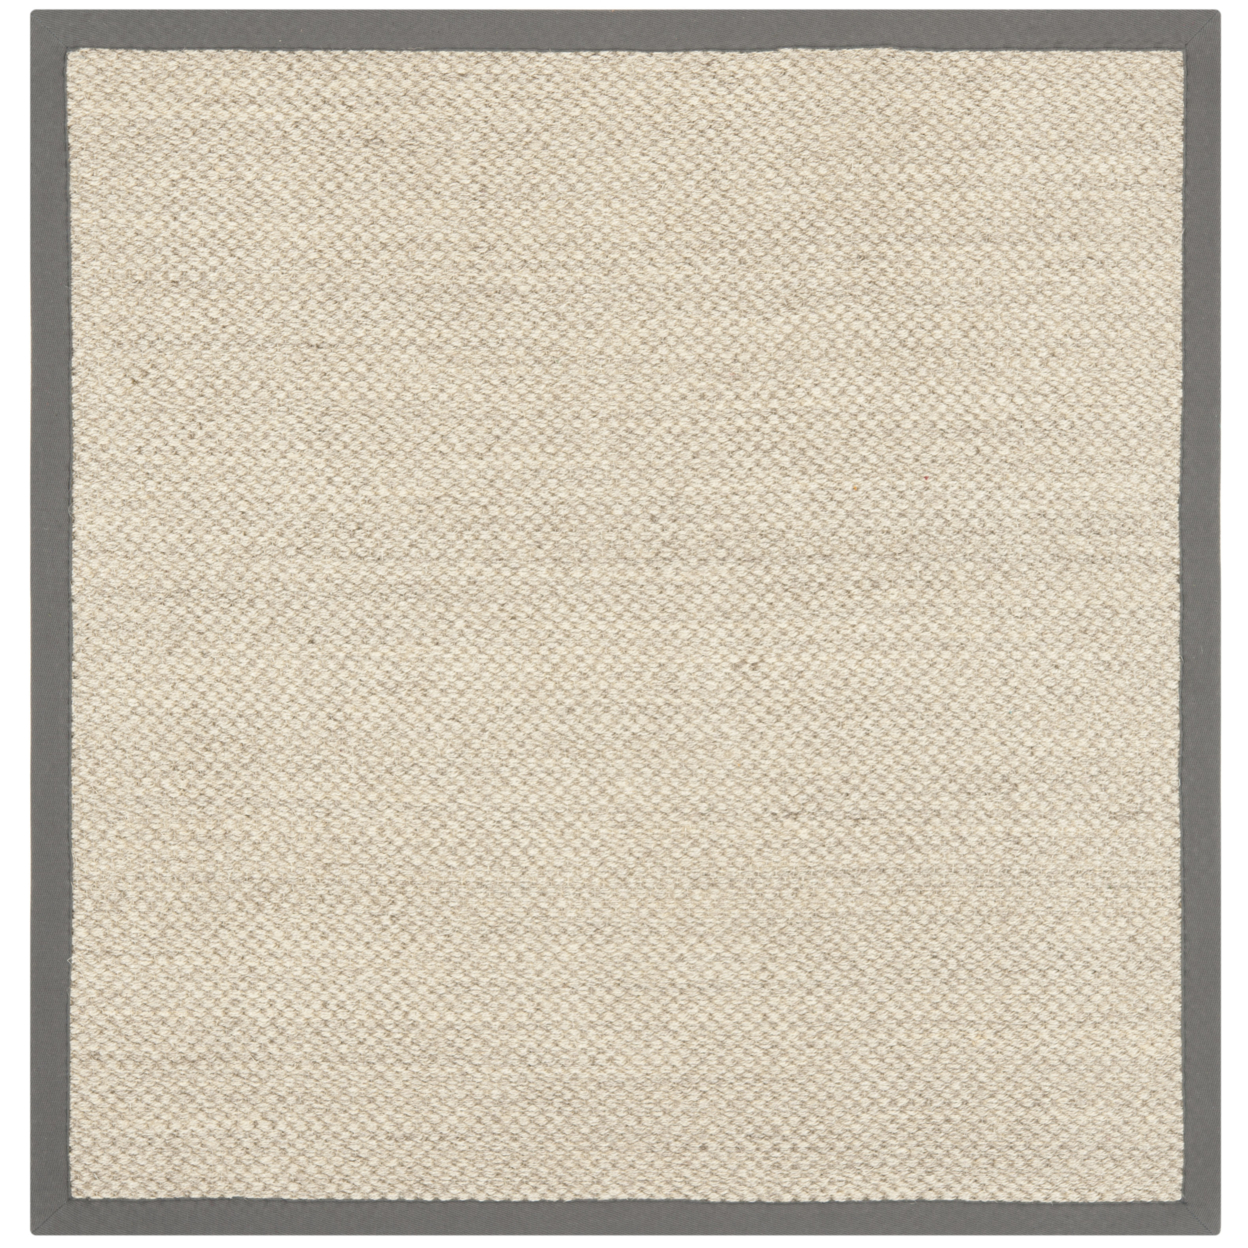 SAFAVIEH Natural Fiber Collection NF443B Marble/Grey Rug - 4' Square